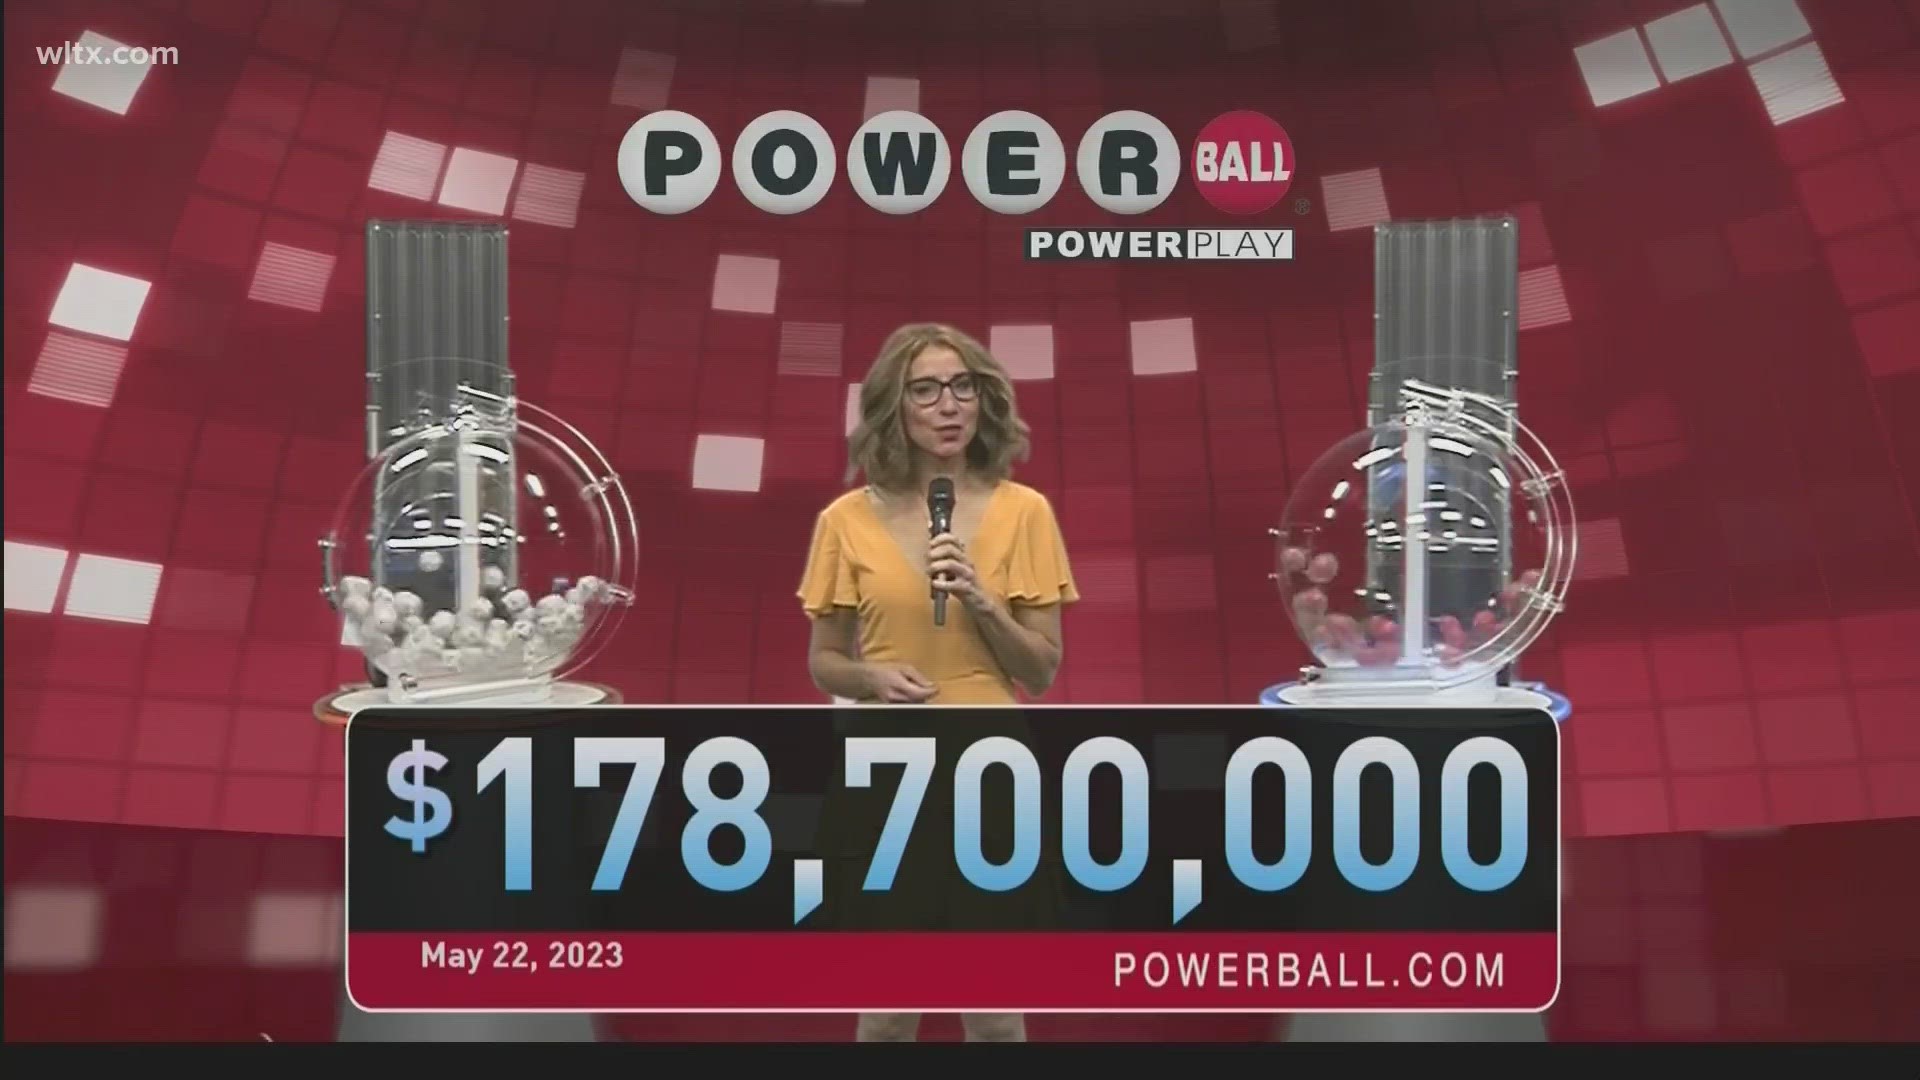 Here are the winning Powerball numbers for Monday, May 22, 2023.